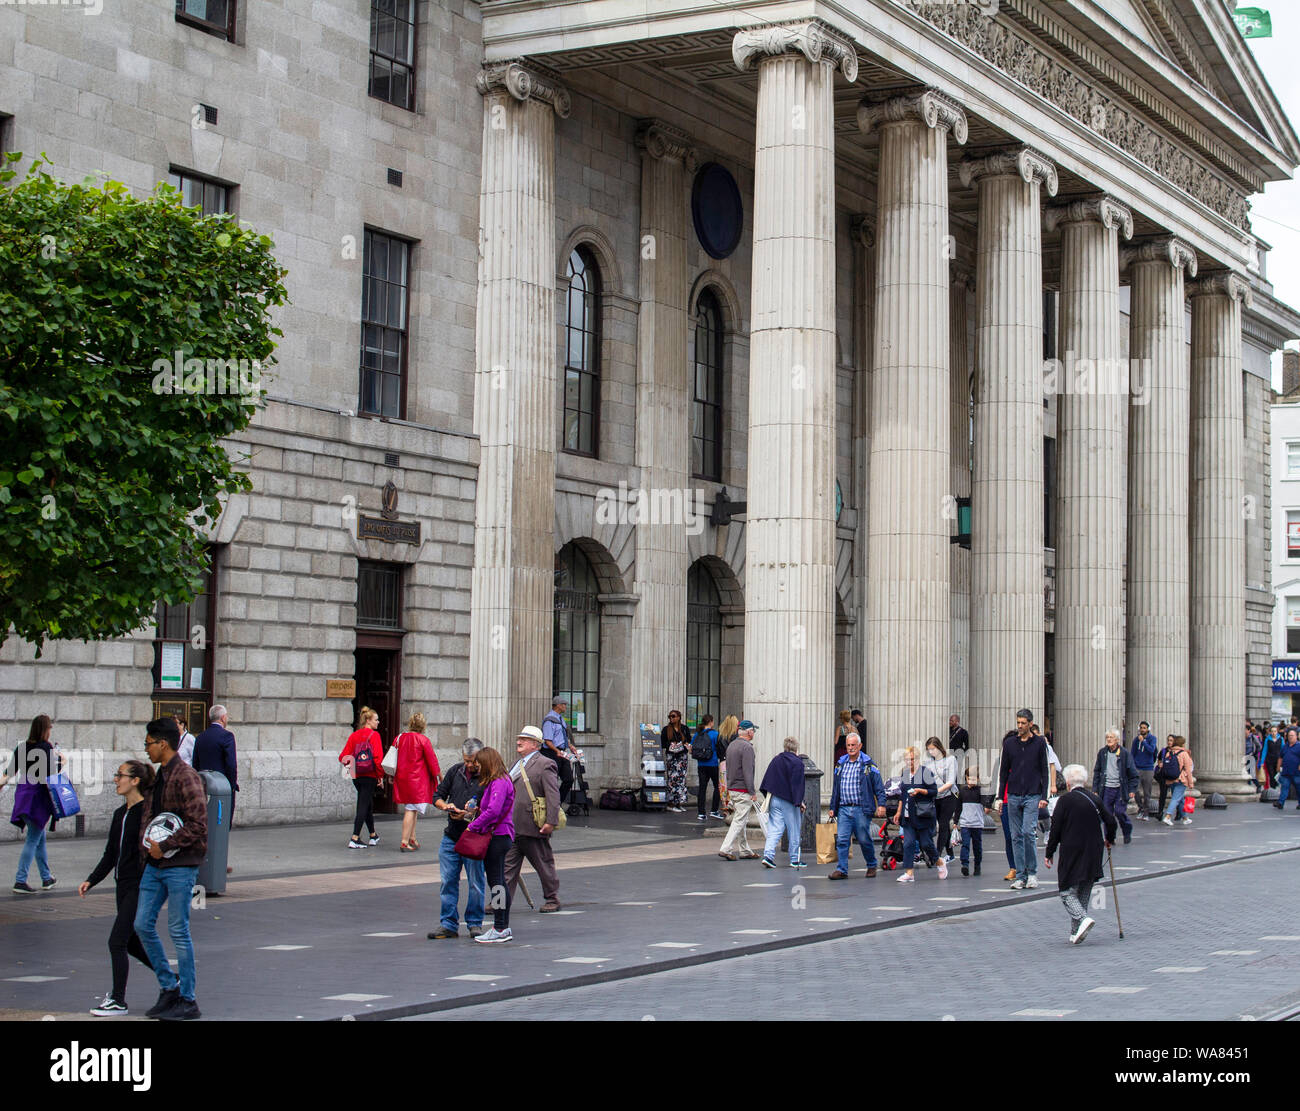 Le General Post Office (GPO) sur O'Connell Street, Dublin, Irlande.. Banque D'Images